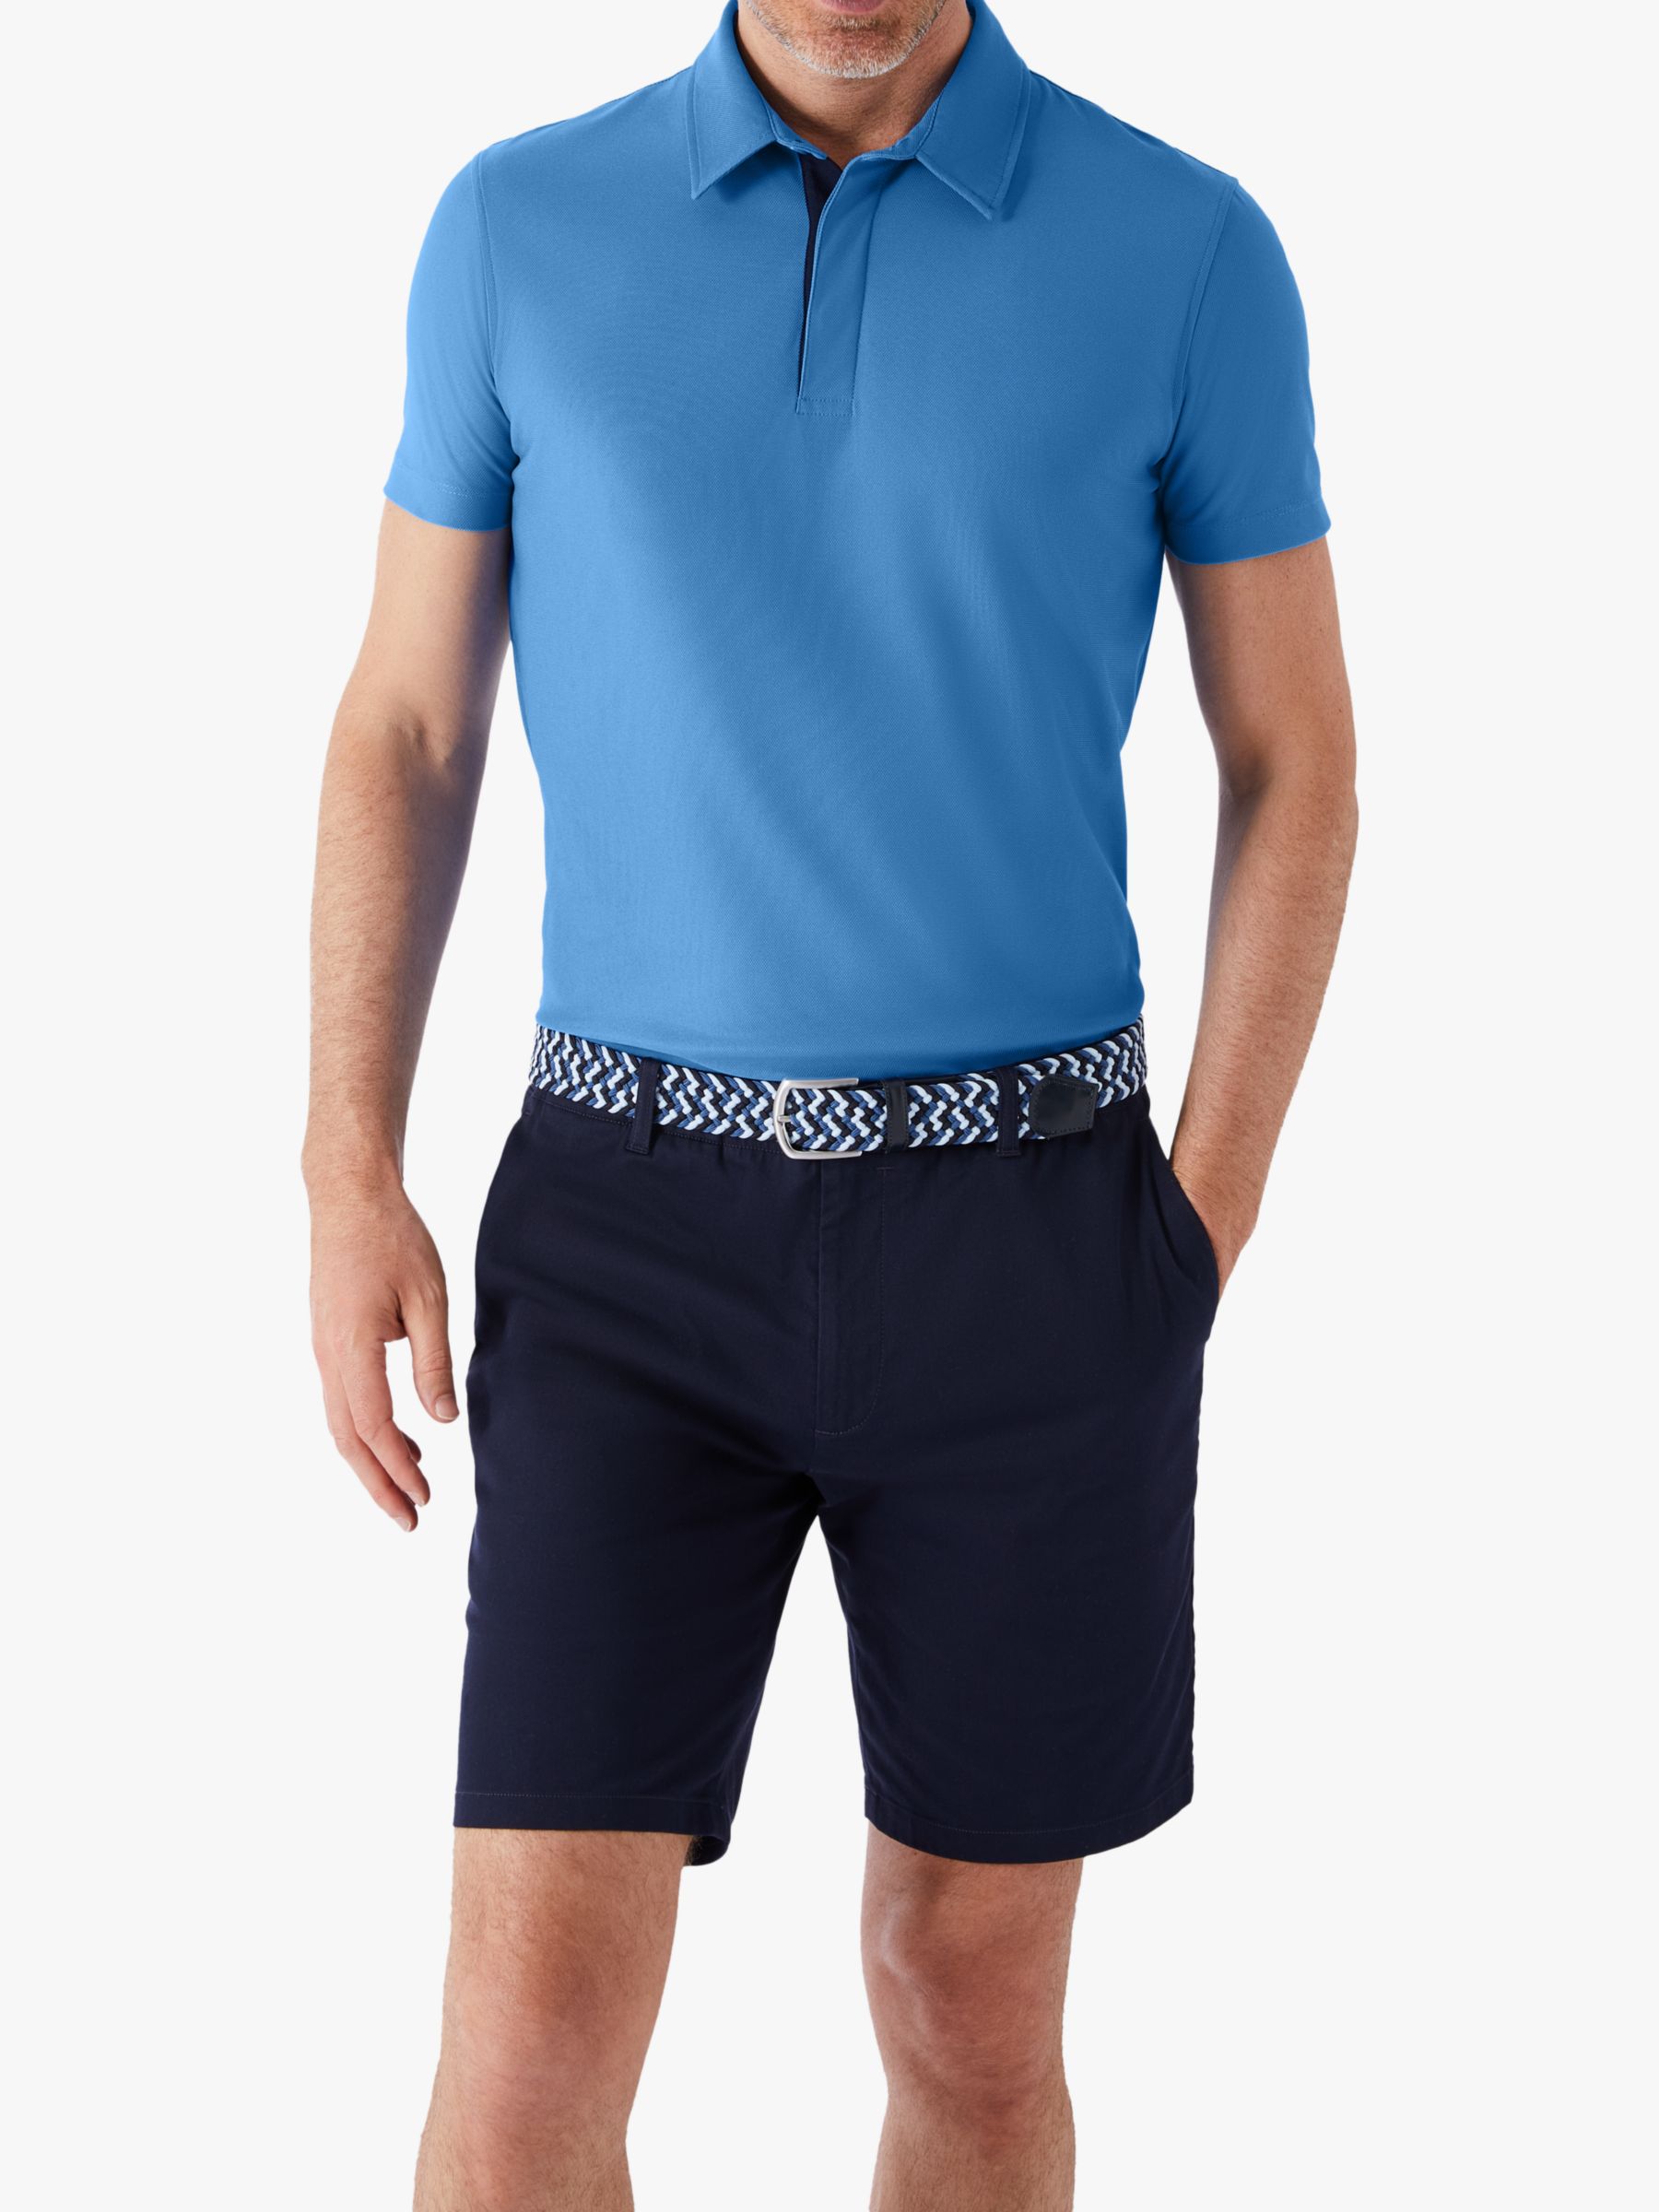 SPOKE Condor Golf Straight Polo Top, Pacific at John Lewis & Partners